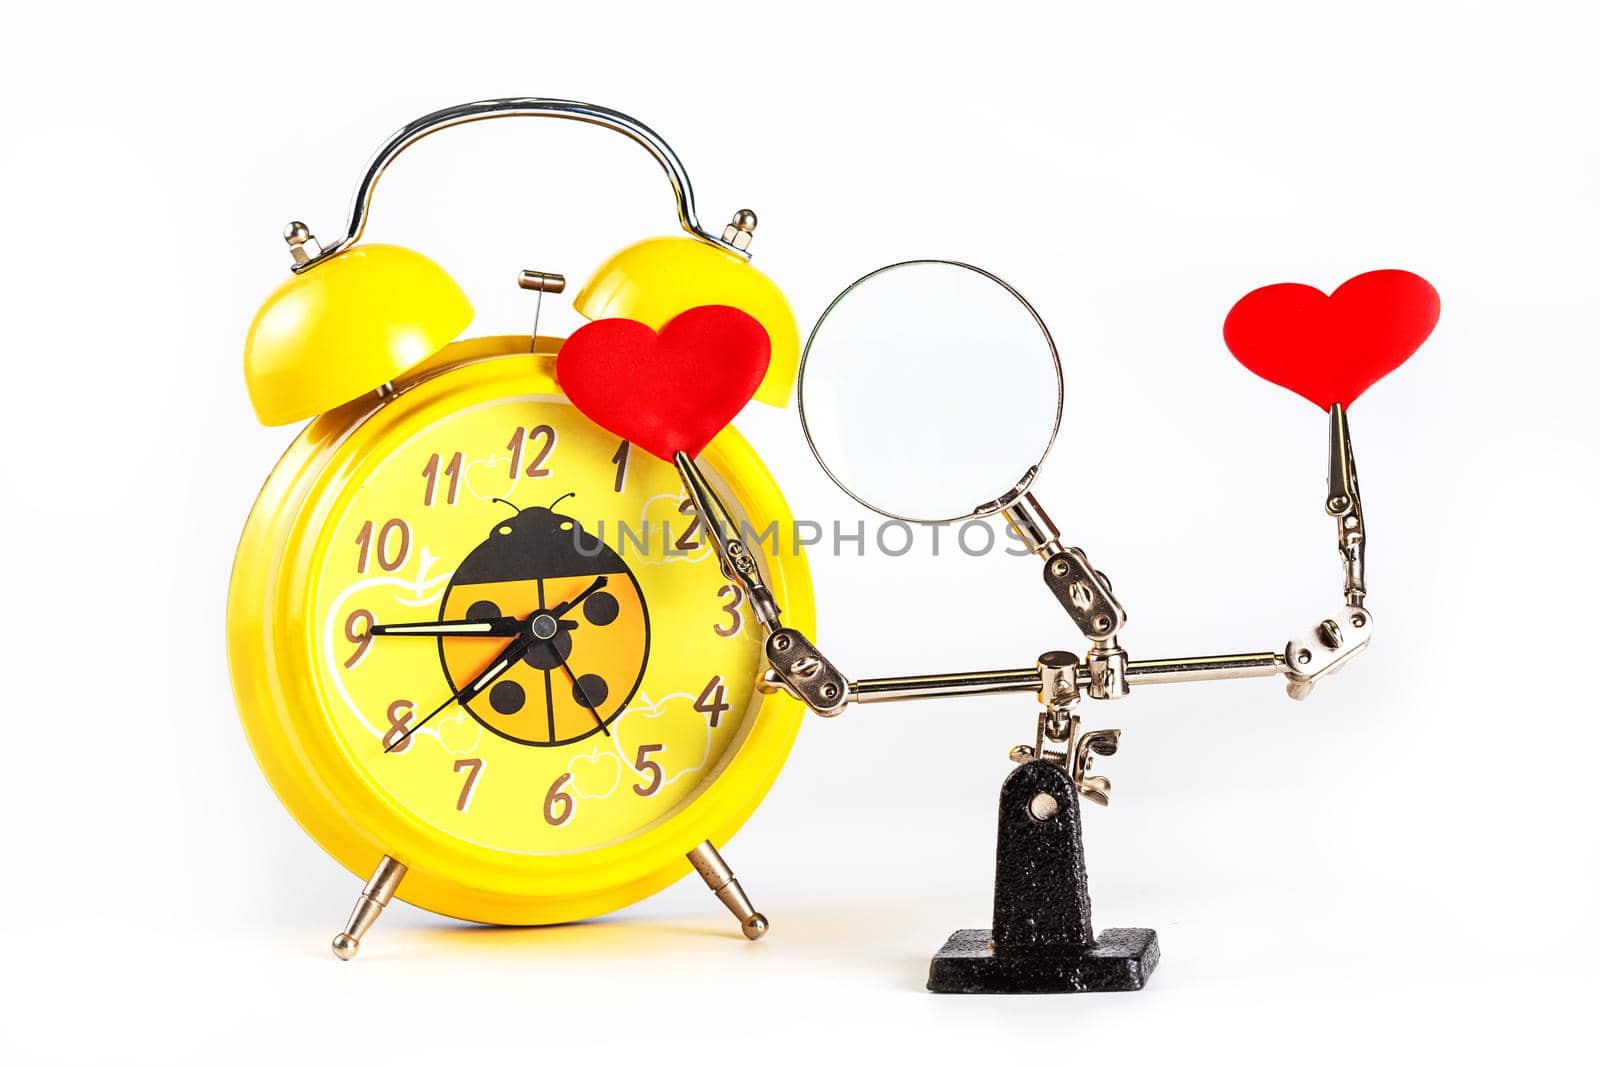 .Abstract Valentines Day background with engineering tool third hand holding hearts and alarm clock on white background